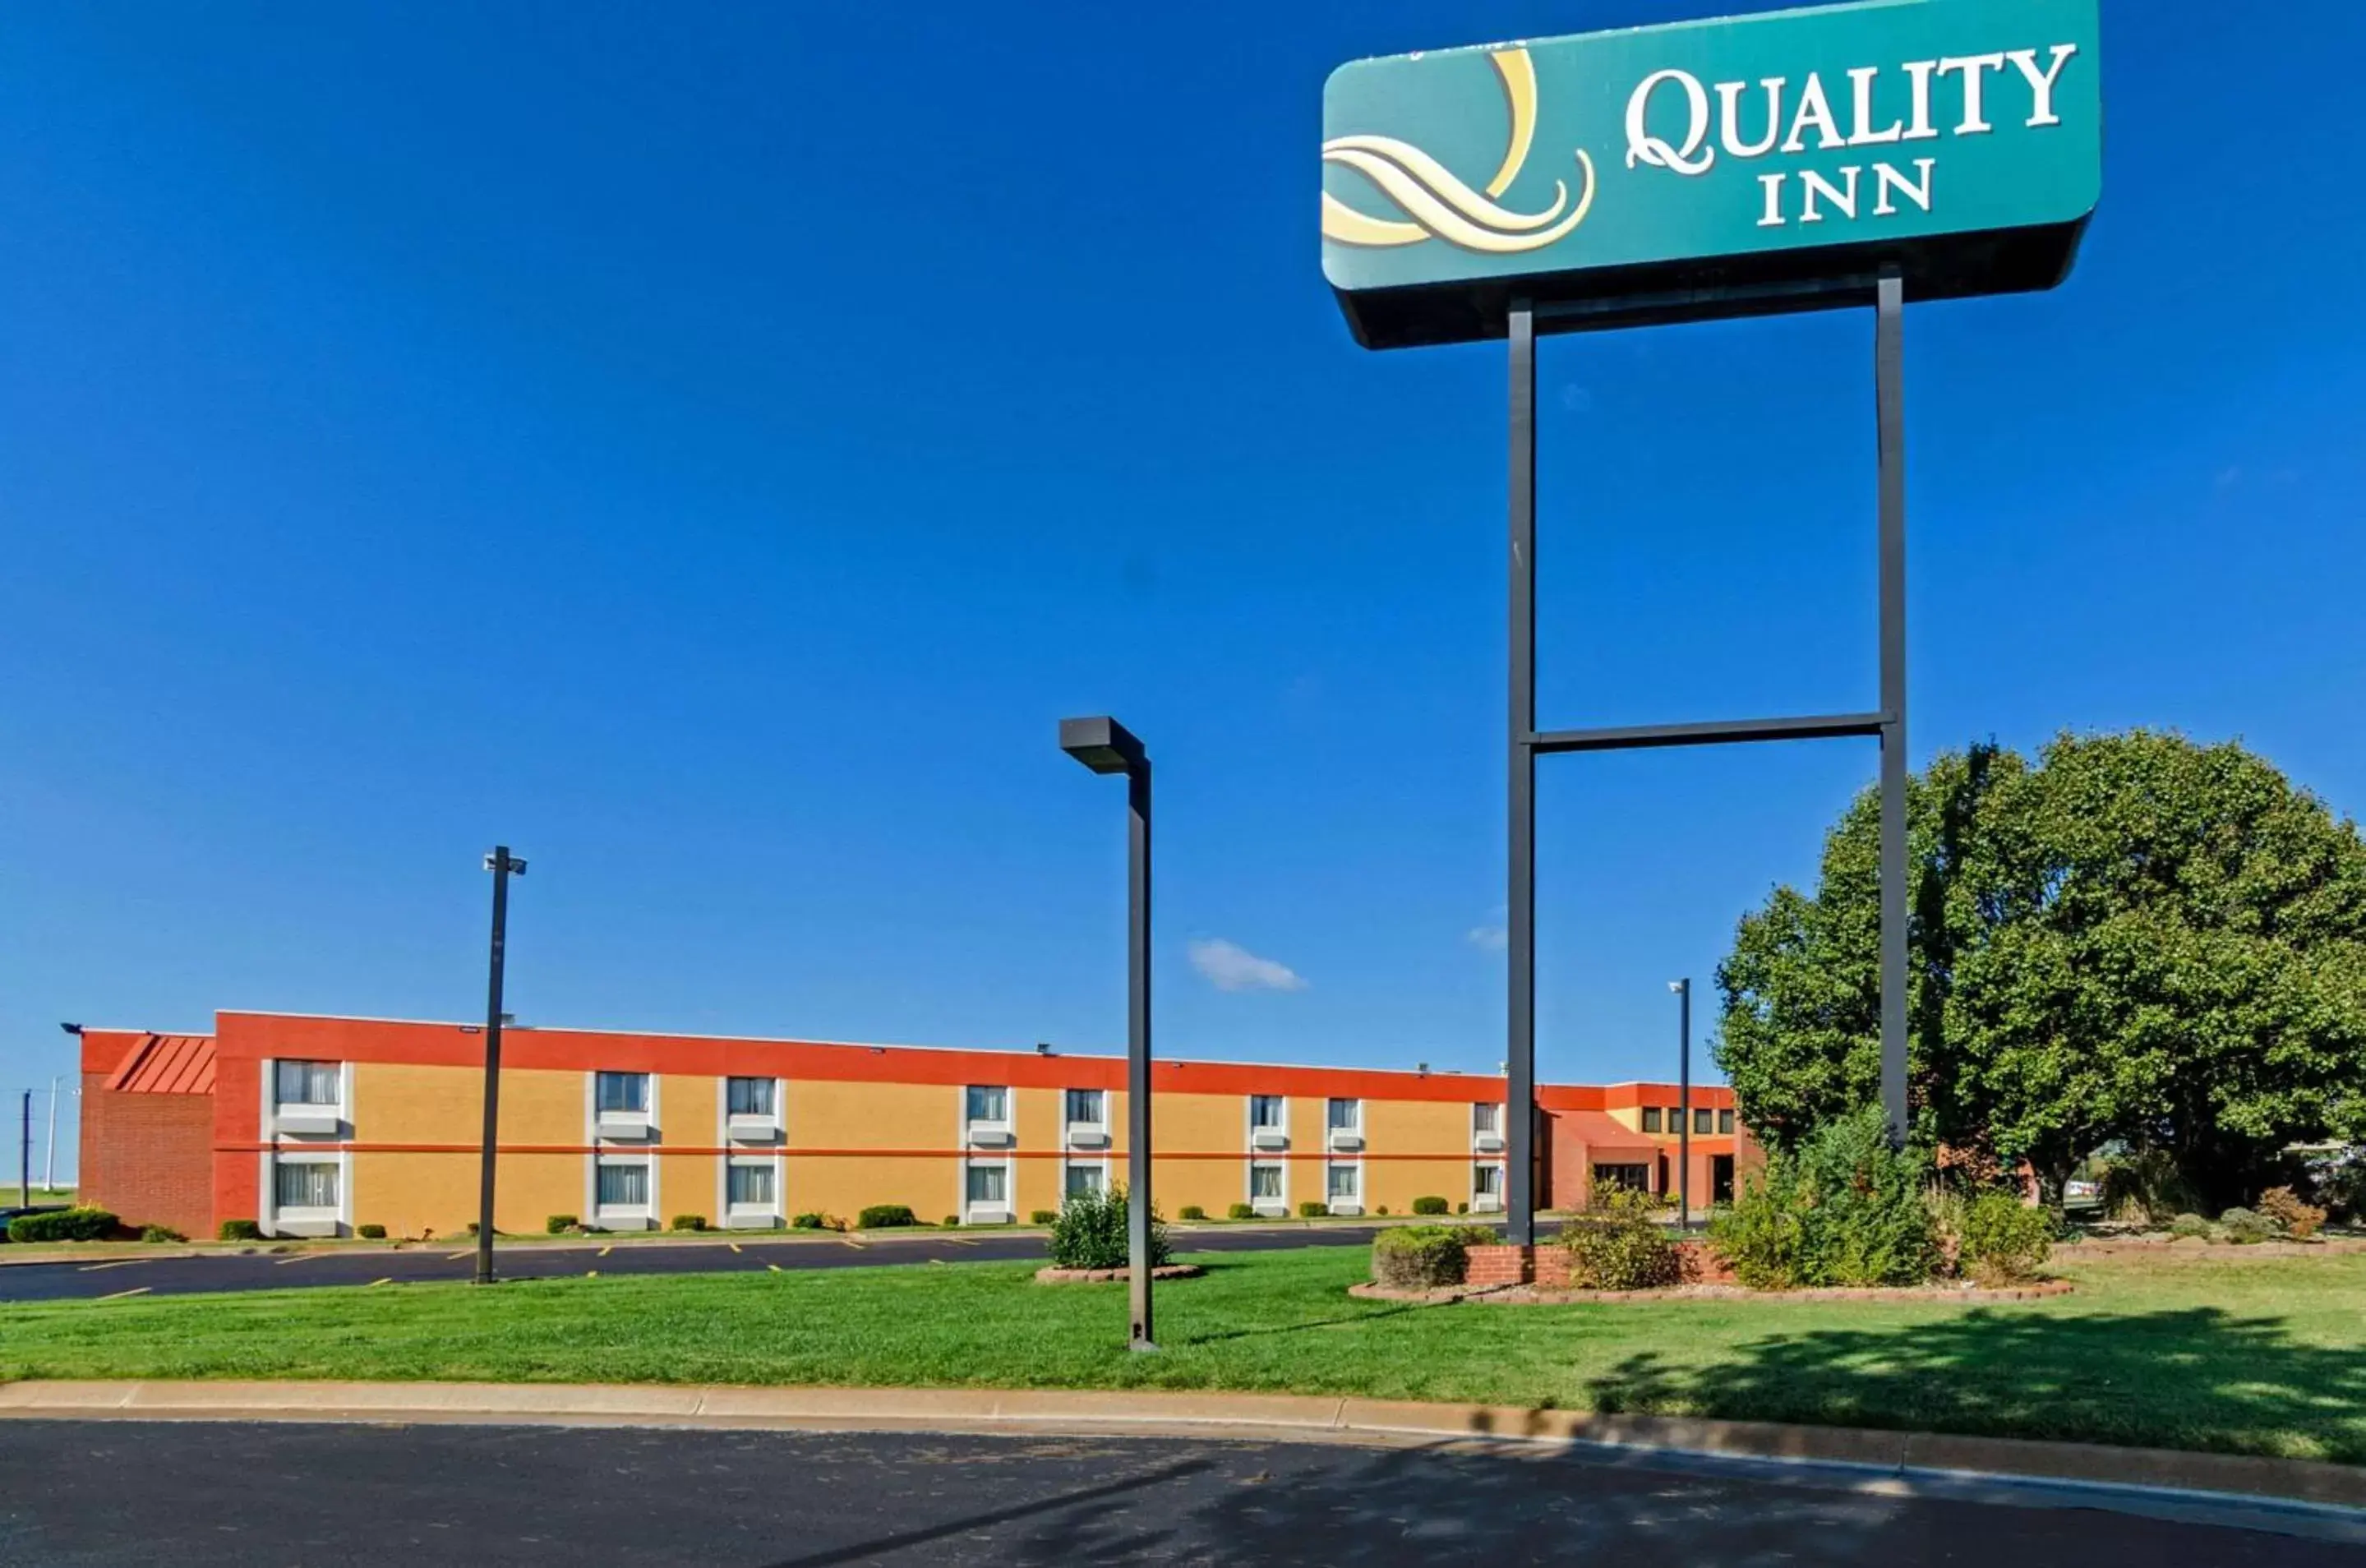 Property building in Quality Inn South